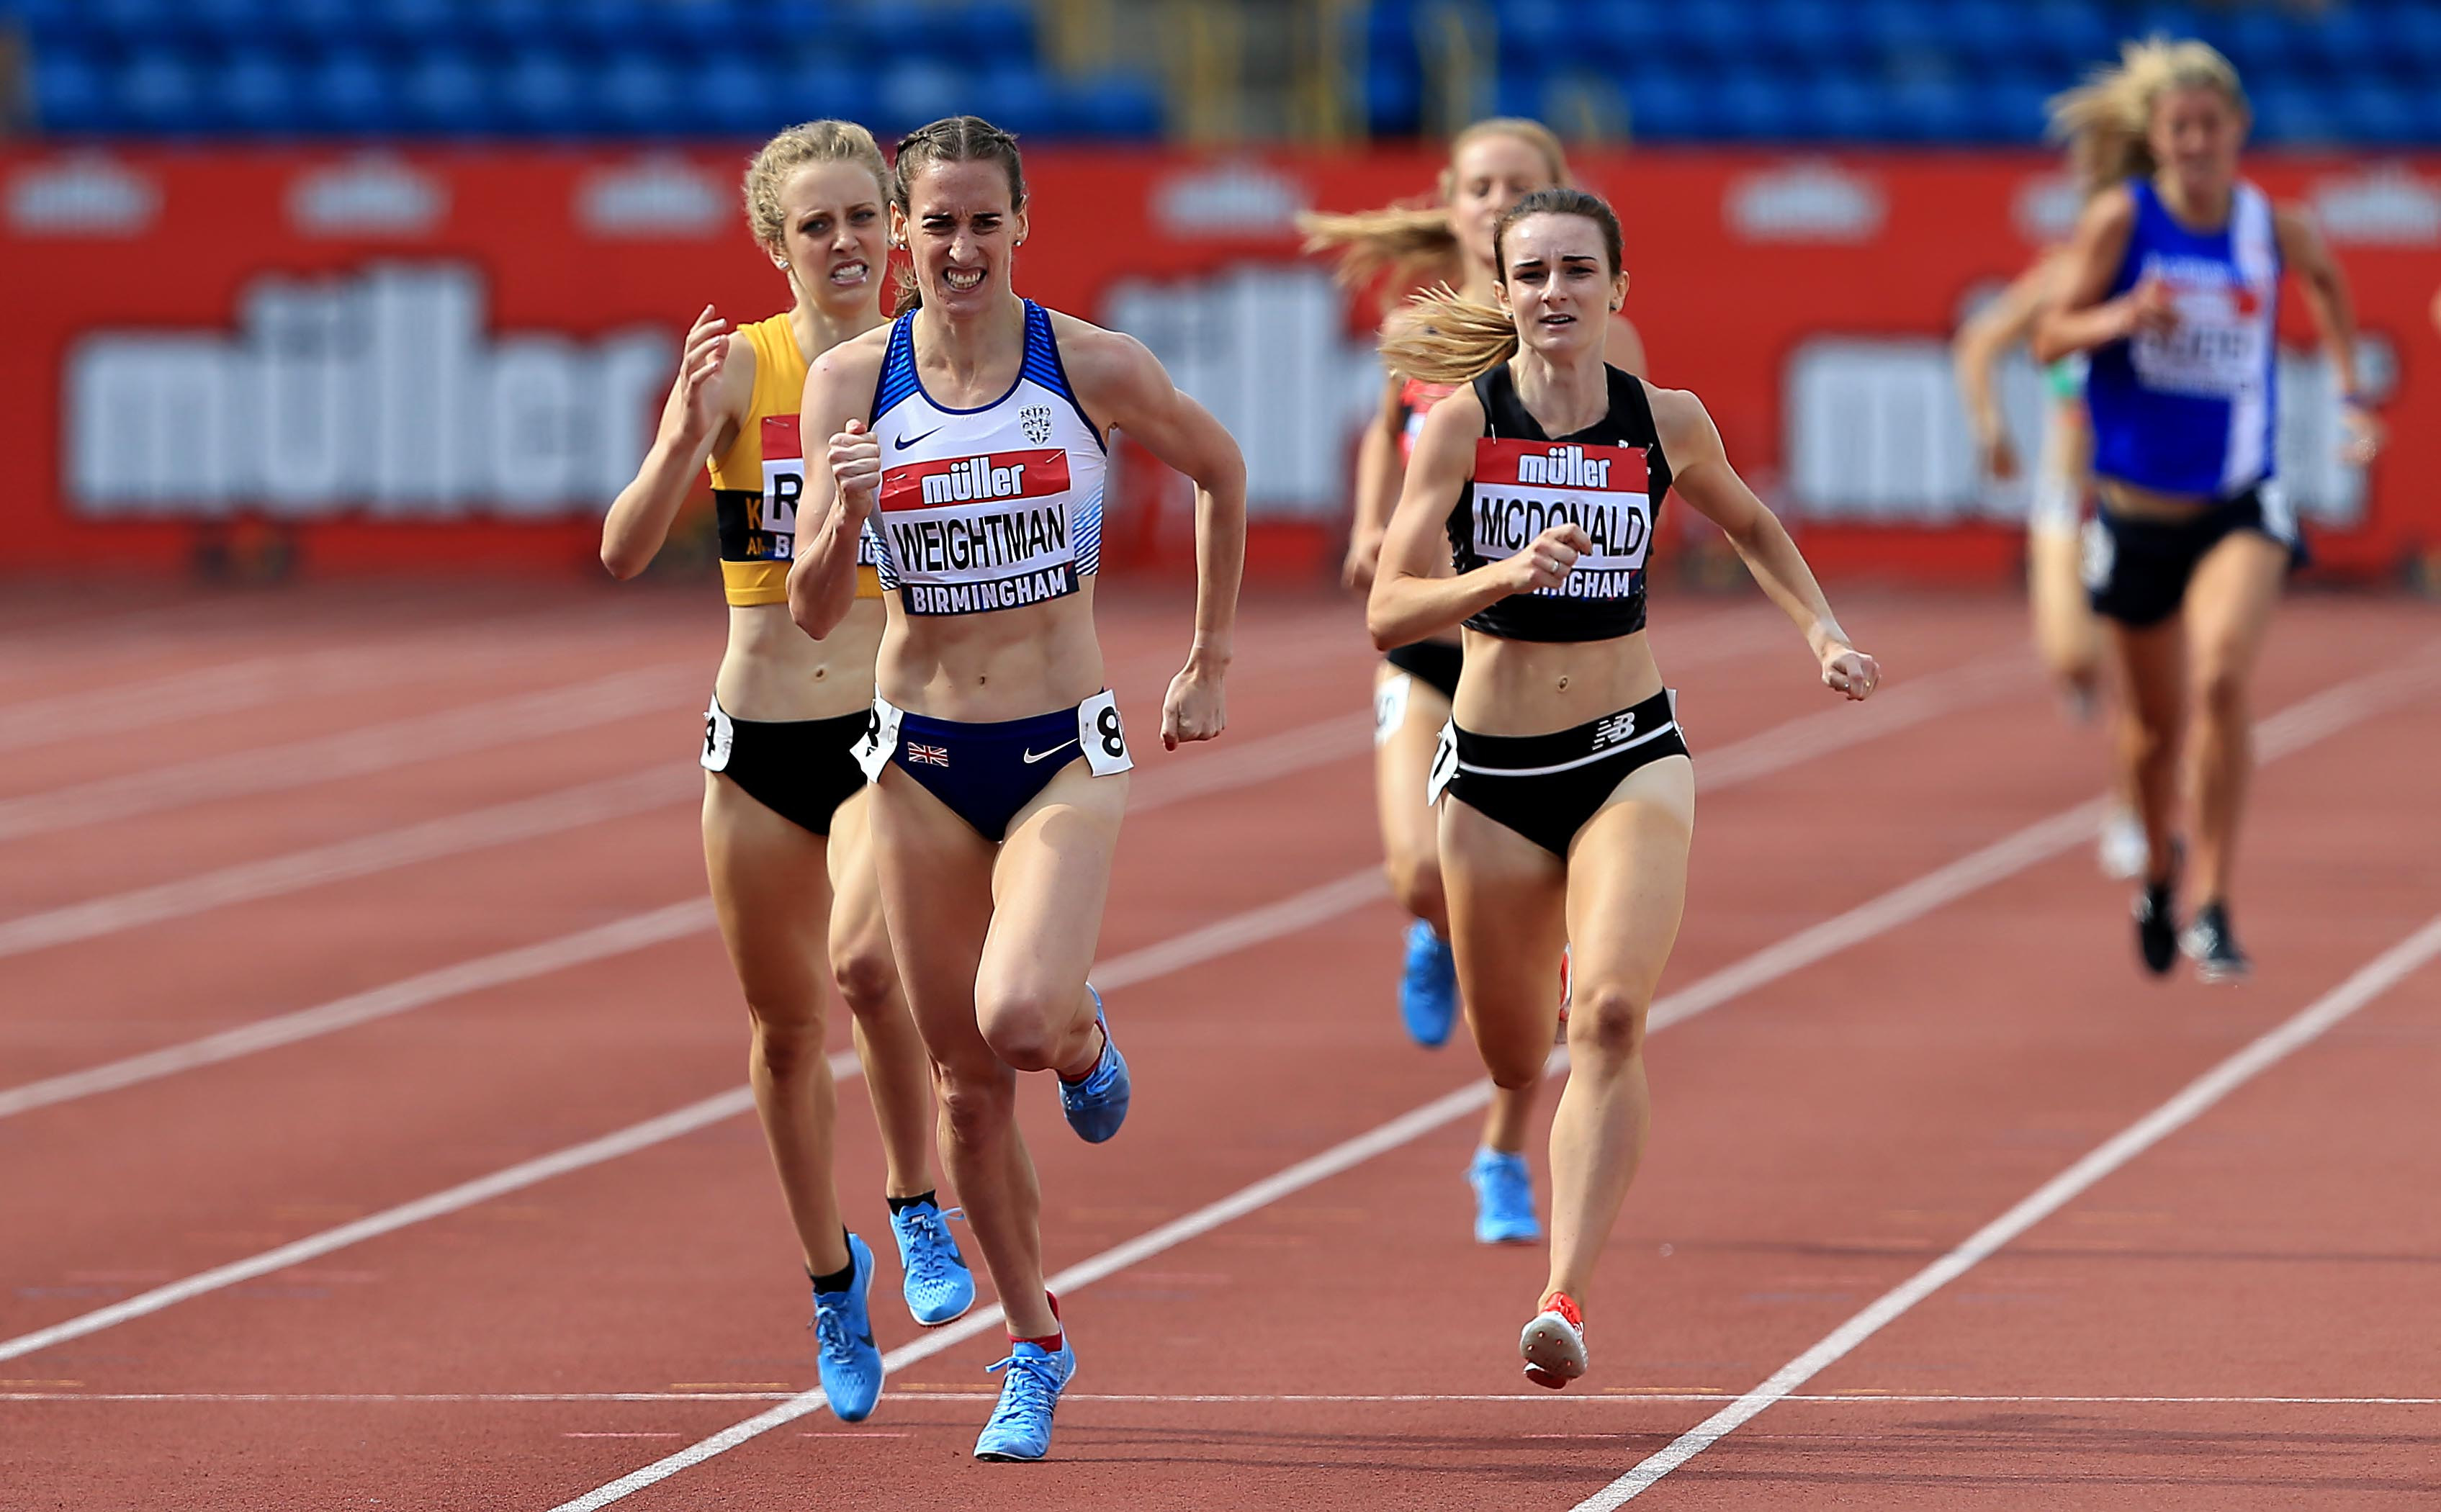 'MISSING BERLIN MADE ME STRONGER THIS SUMMER' - MCDONALD TALKS TRIALS AHEAD OF 1500M